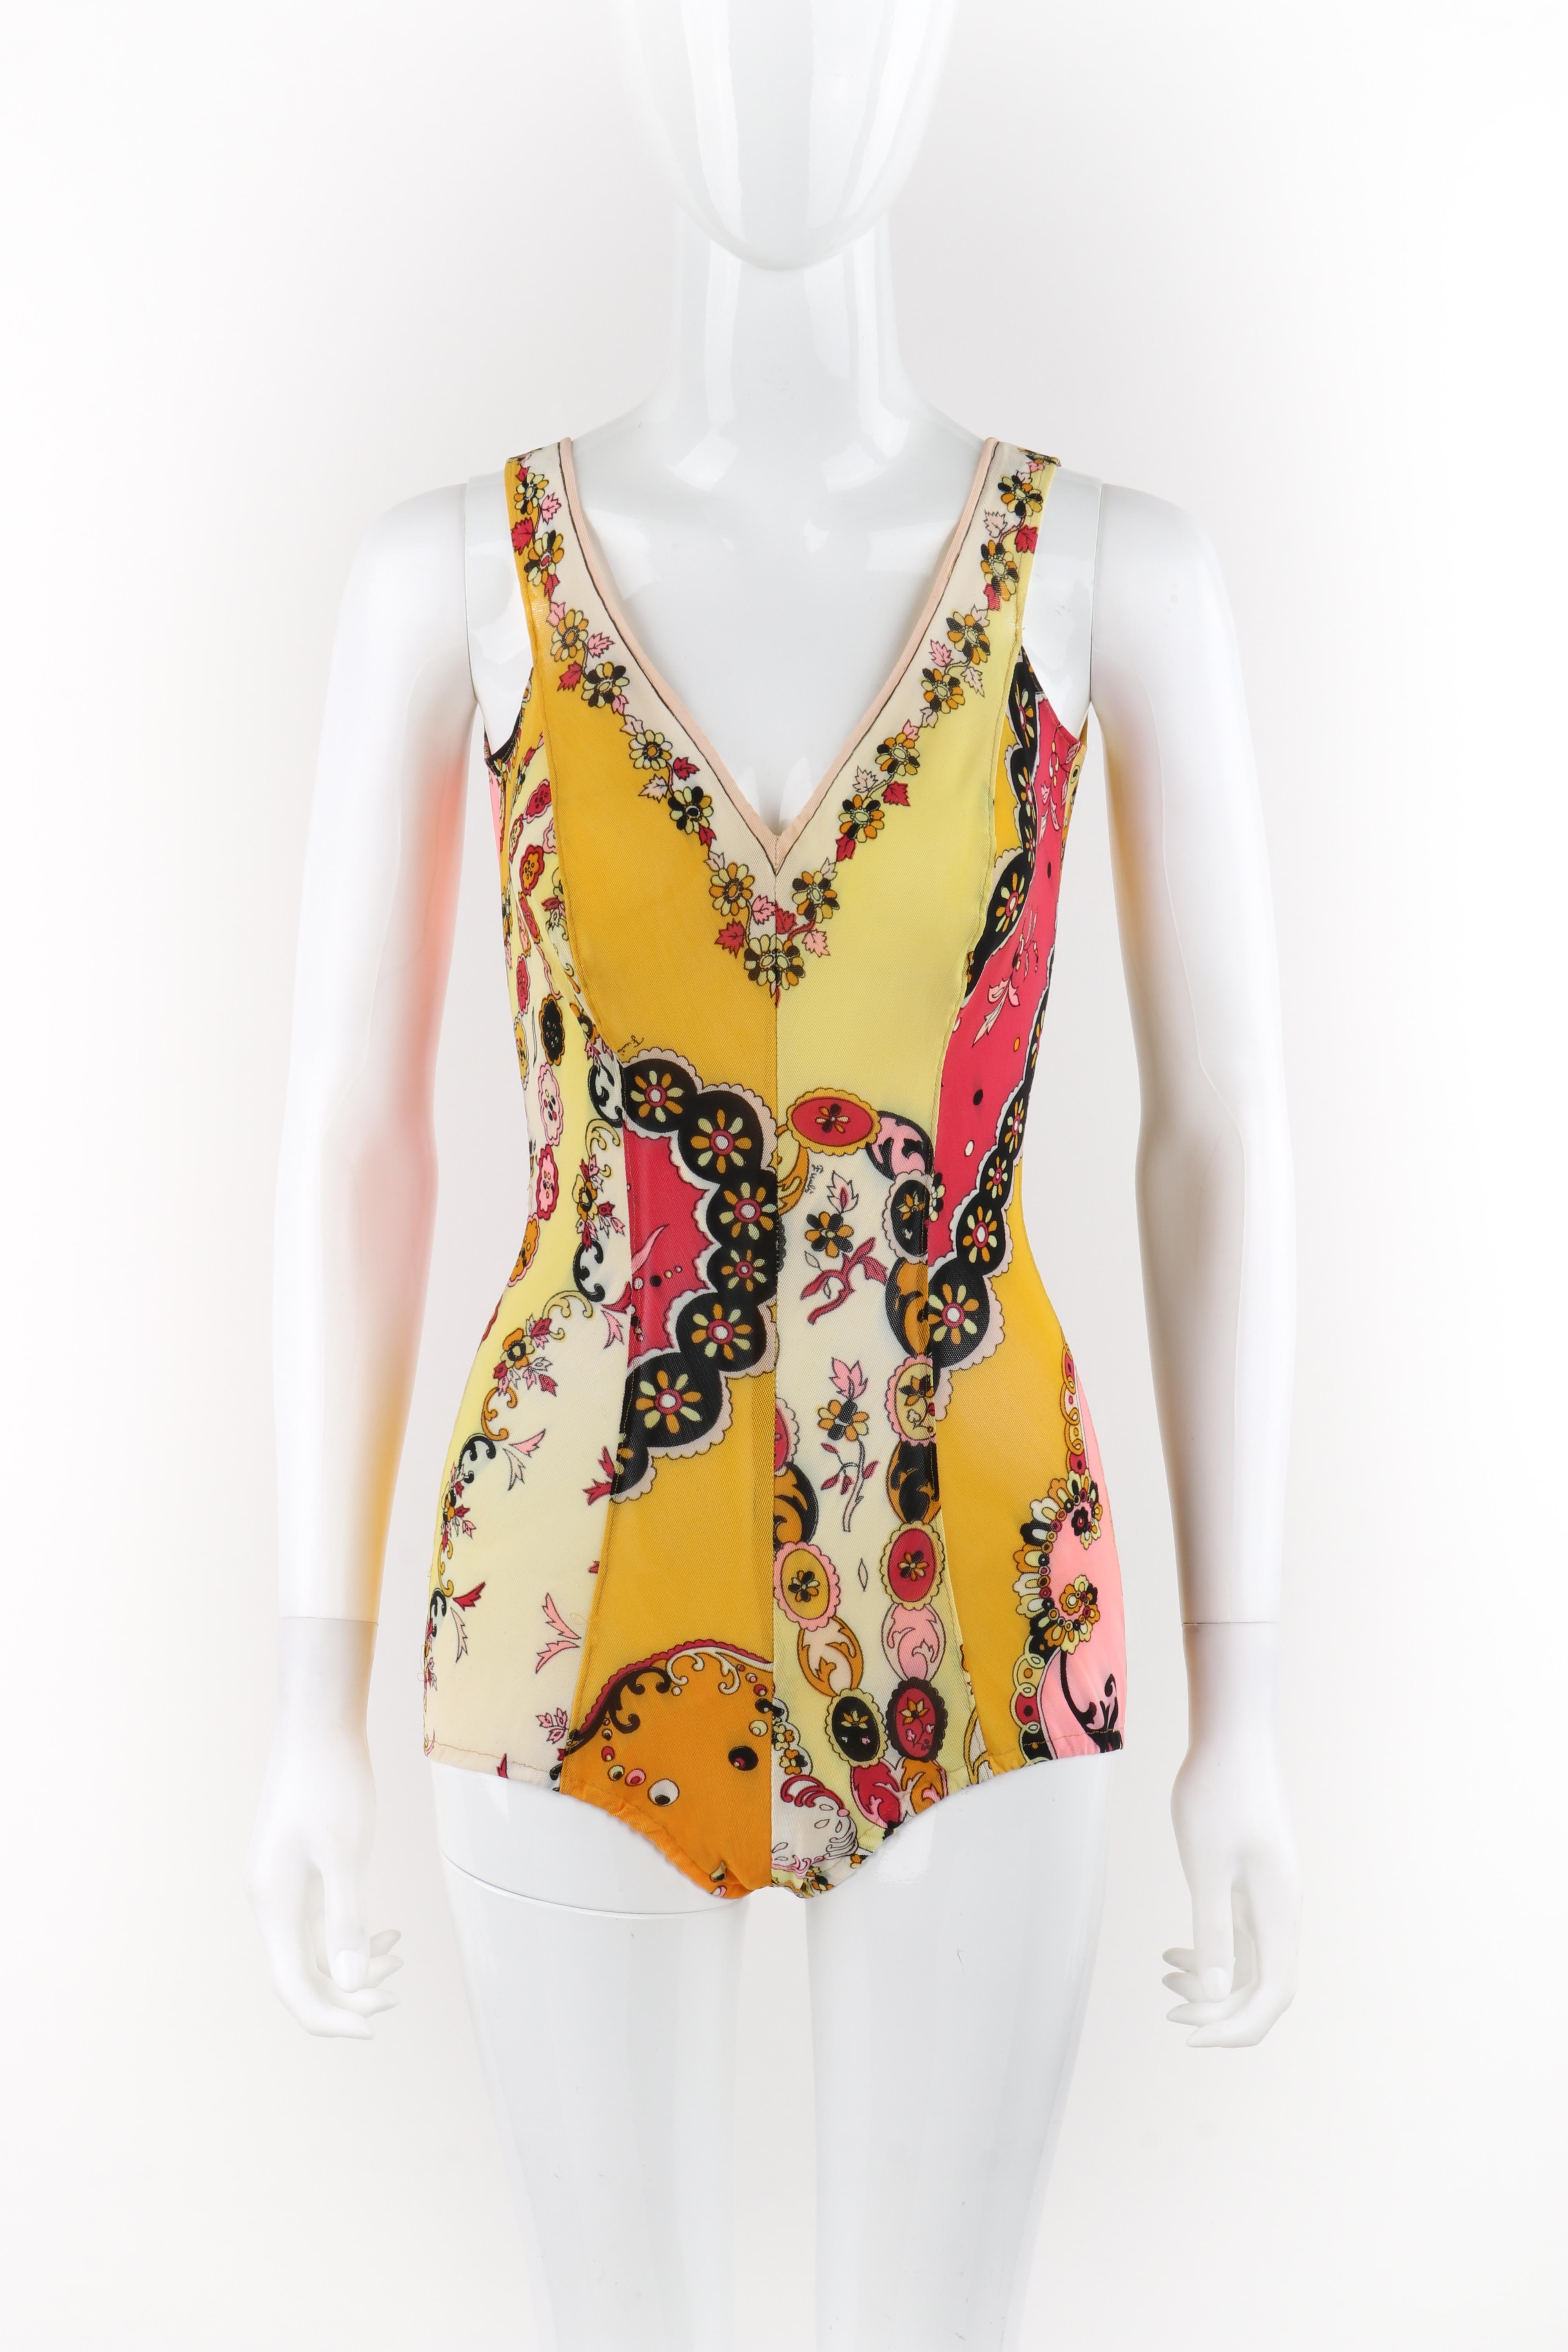 Brand / Manufacturer: Emilio Pucci
Circa: 1969
Designer: Emilio Pucci
Style: One-piece swimsuit
Color(s): Shades of yellow, black, pink, white
Lined: No
Marked Fabric Content: 